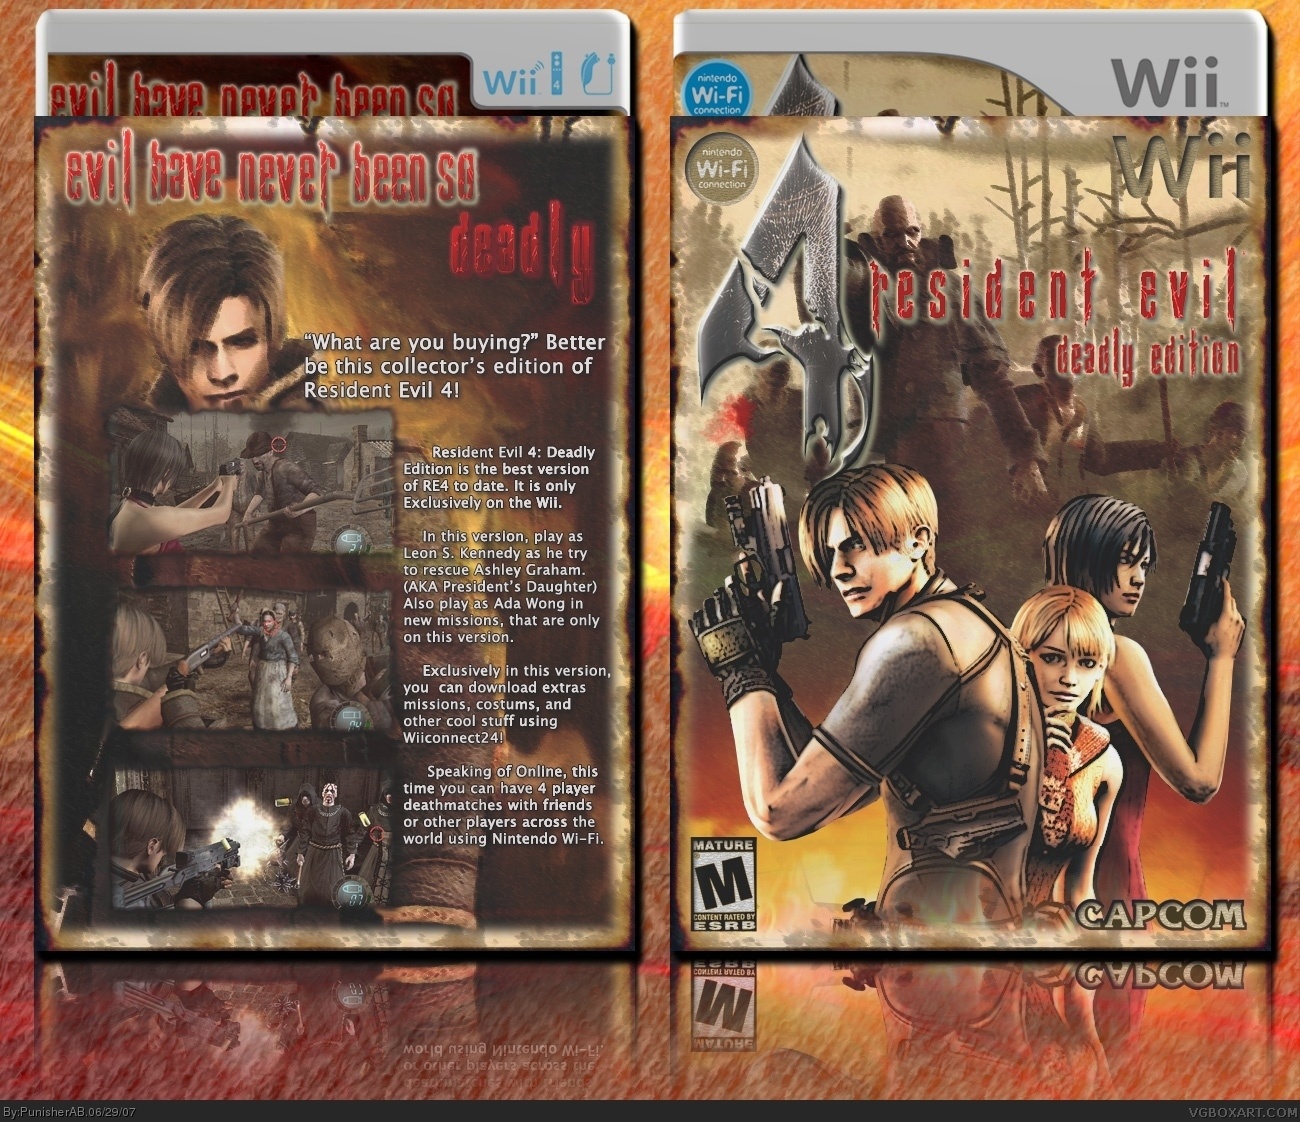 Resident Evil 4 Deadly Edition box cover